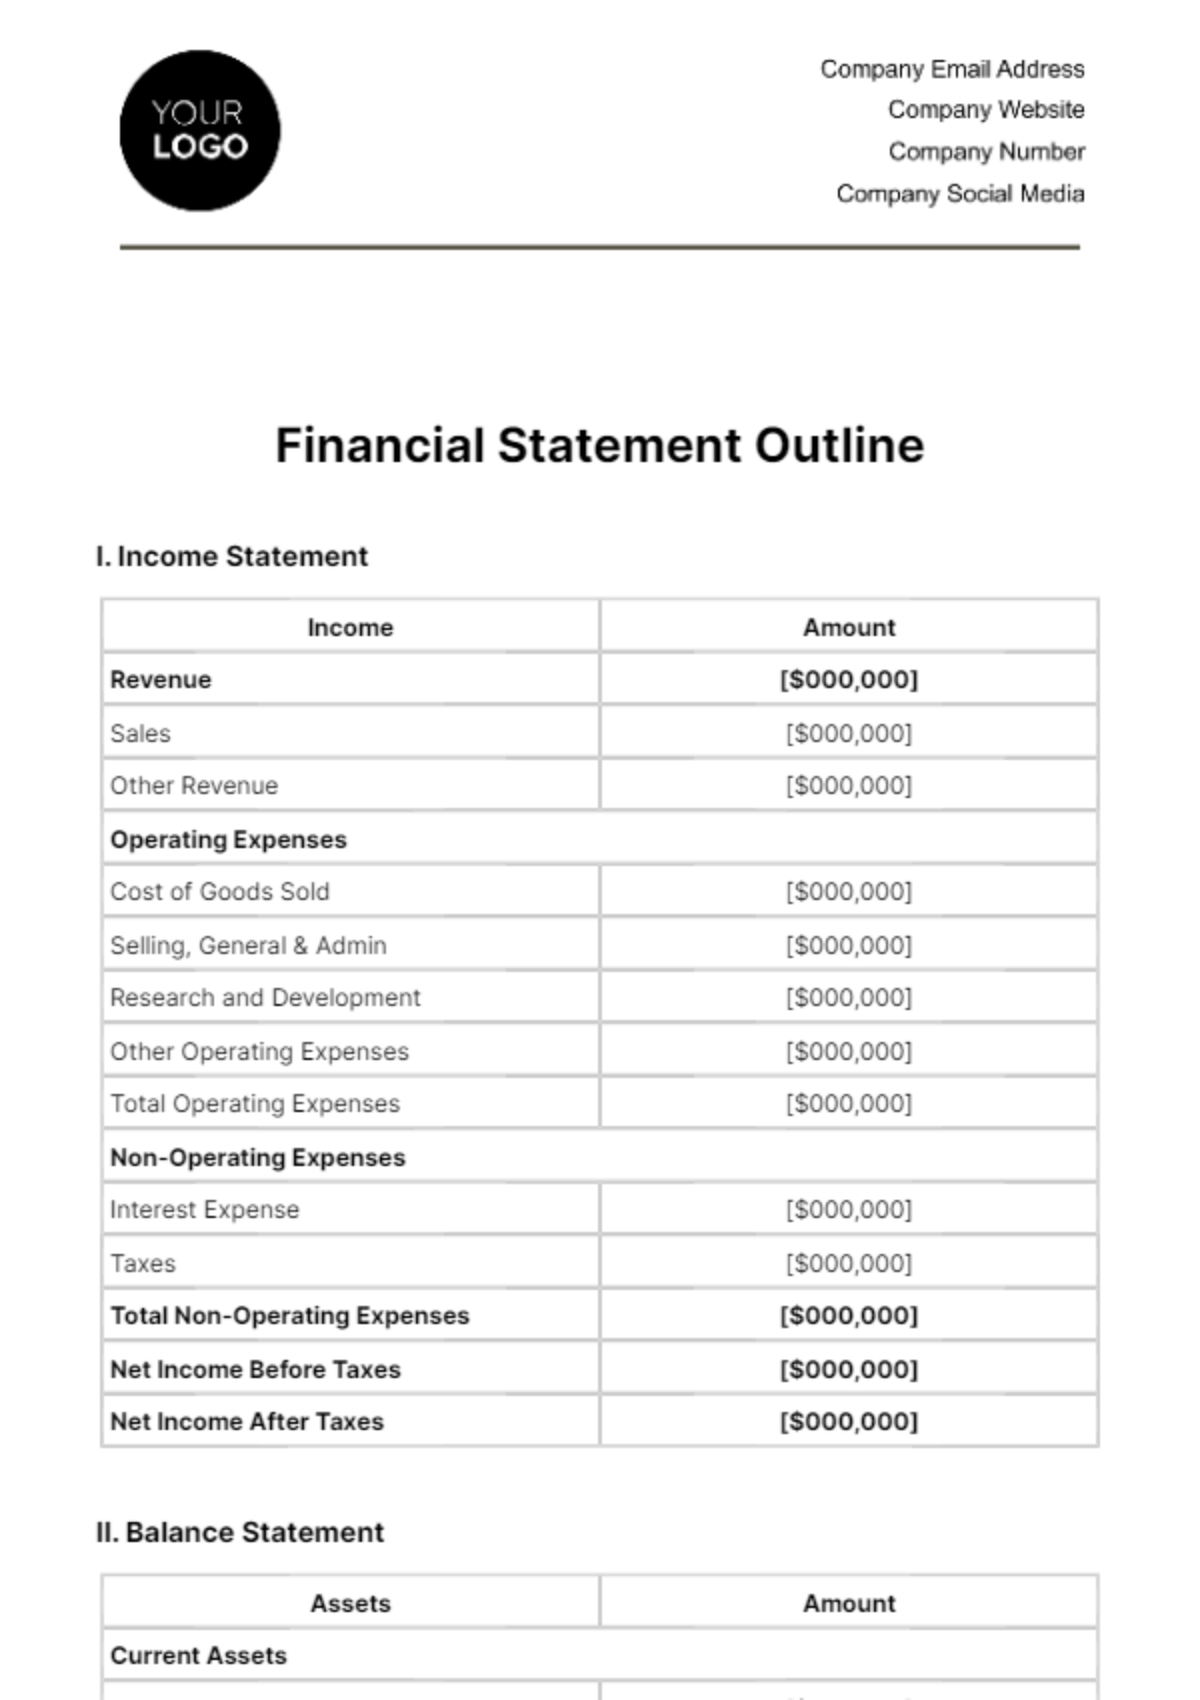 Free Financial Statement Outline Template